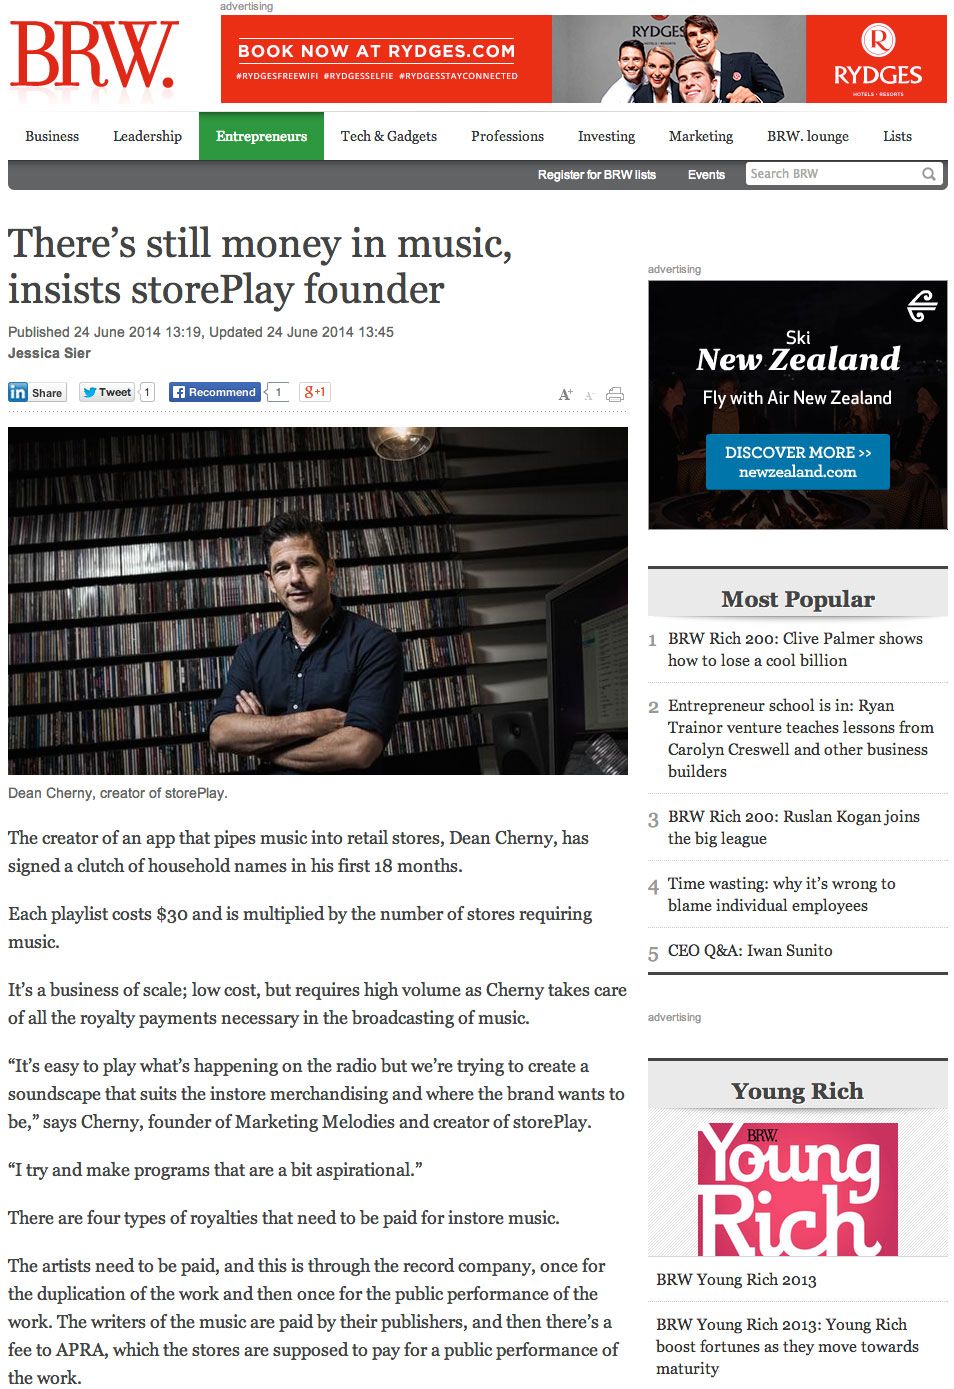 There’s still money in music, insists storePlay founder